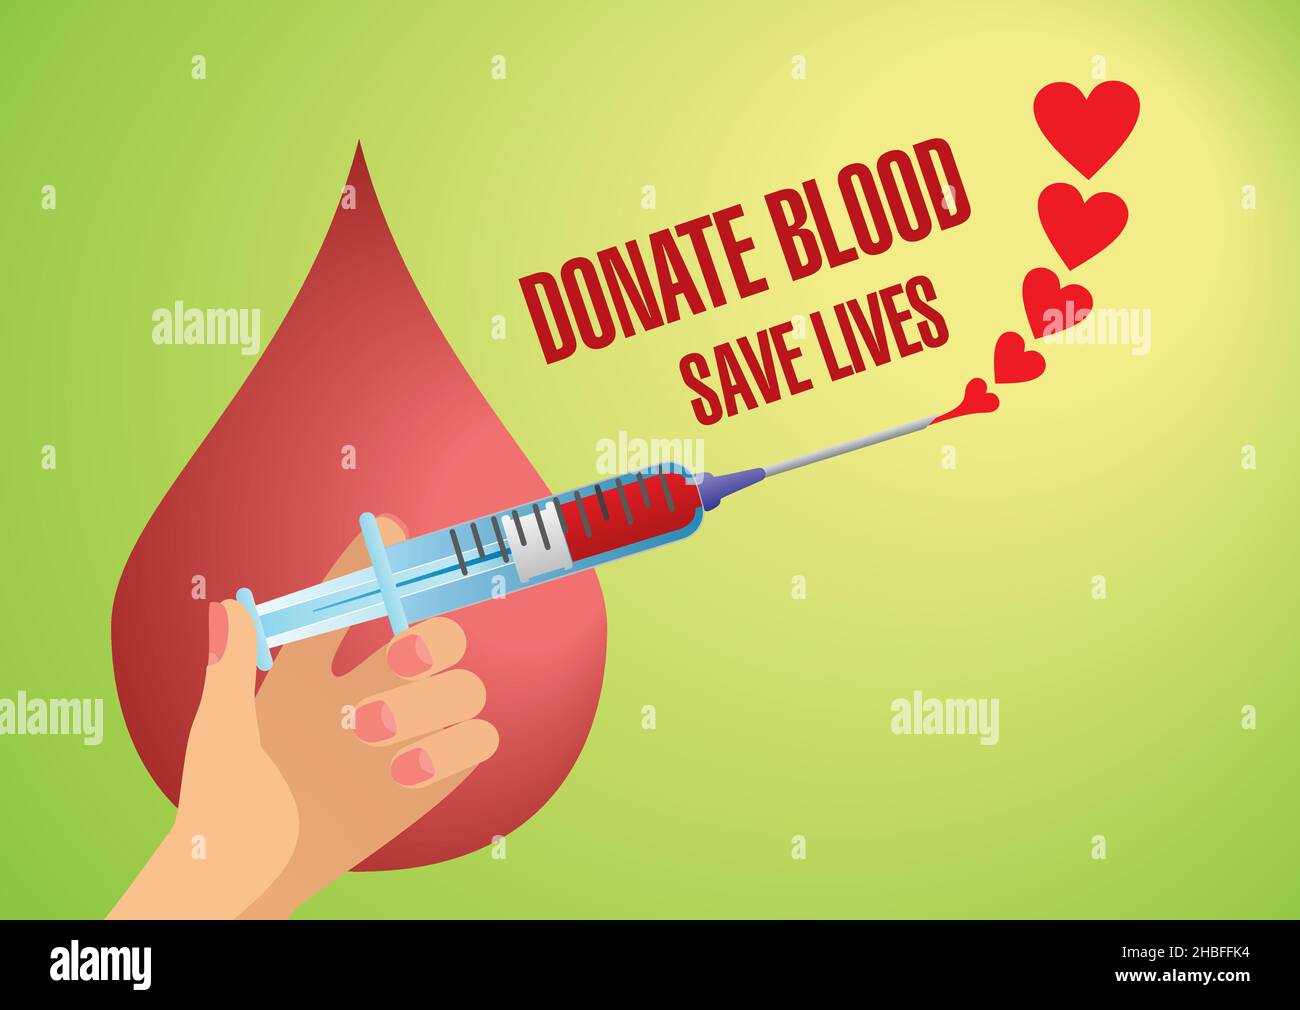 Donate blood, save lives. Drop, hand with syringe and hearts coming through needle. Vector illustration. EPS10. Stock Vector